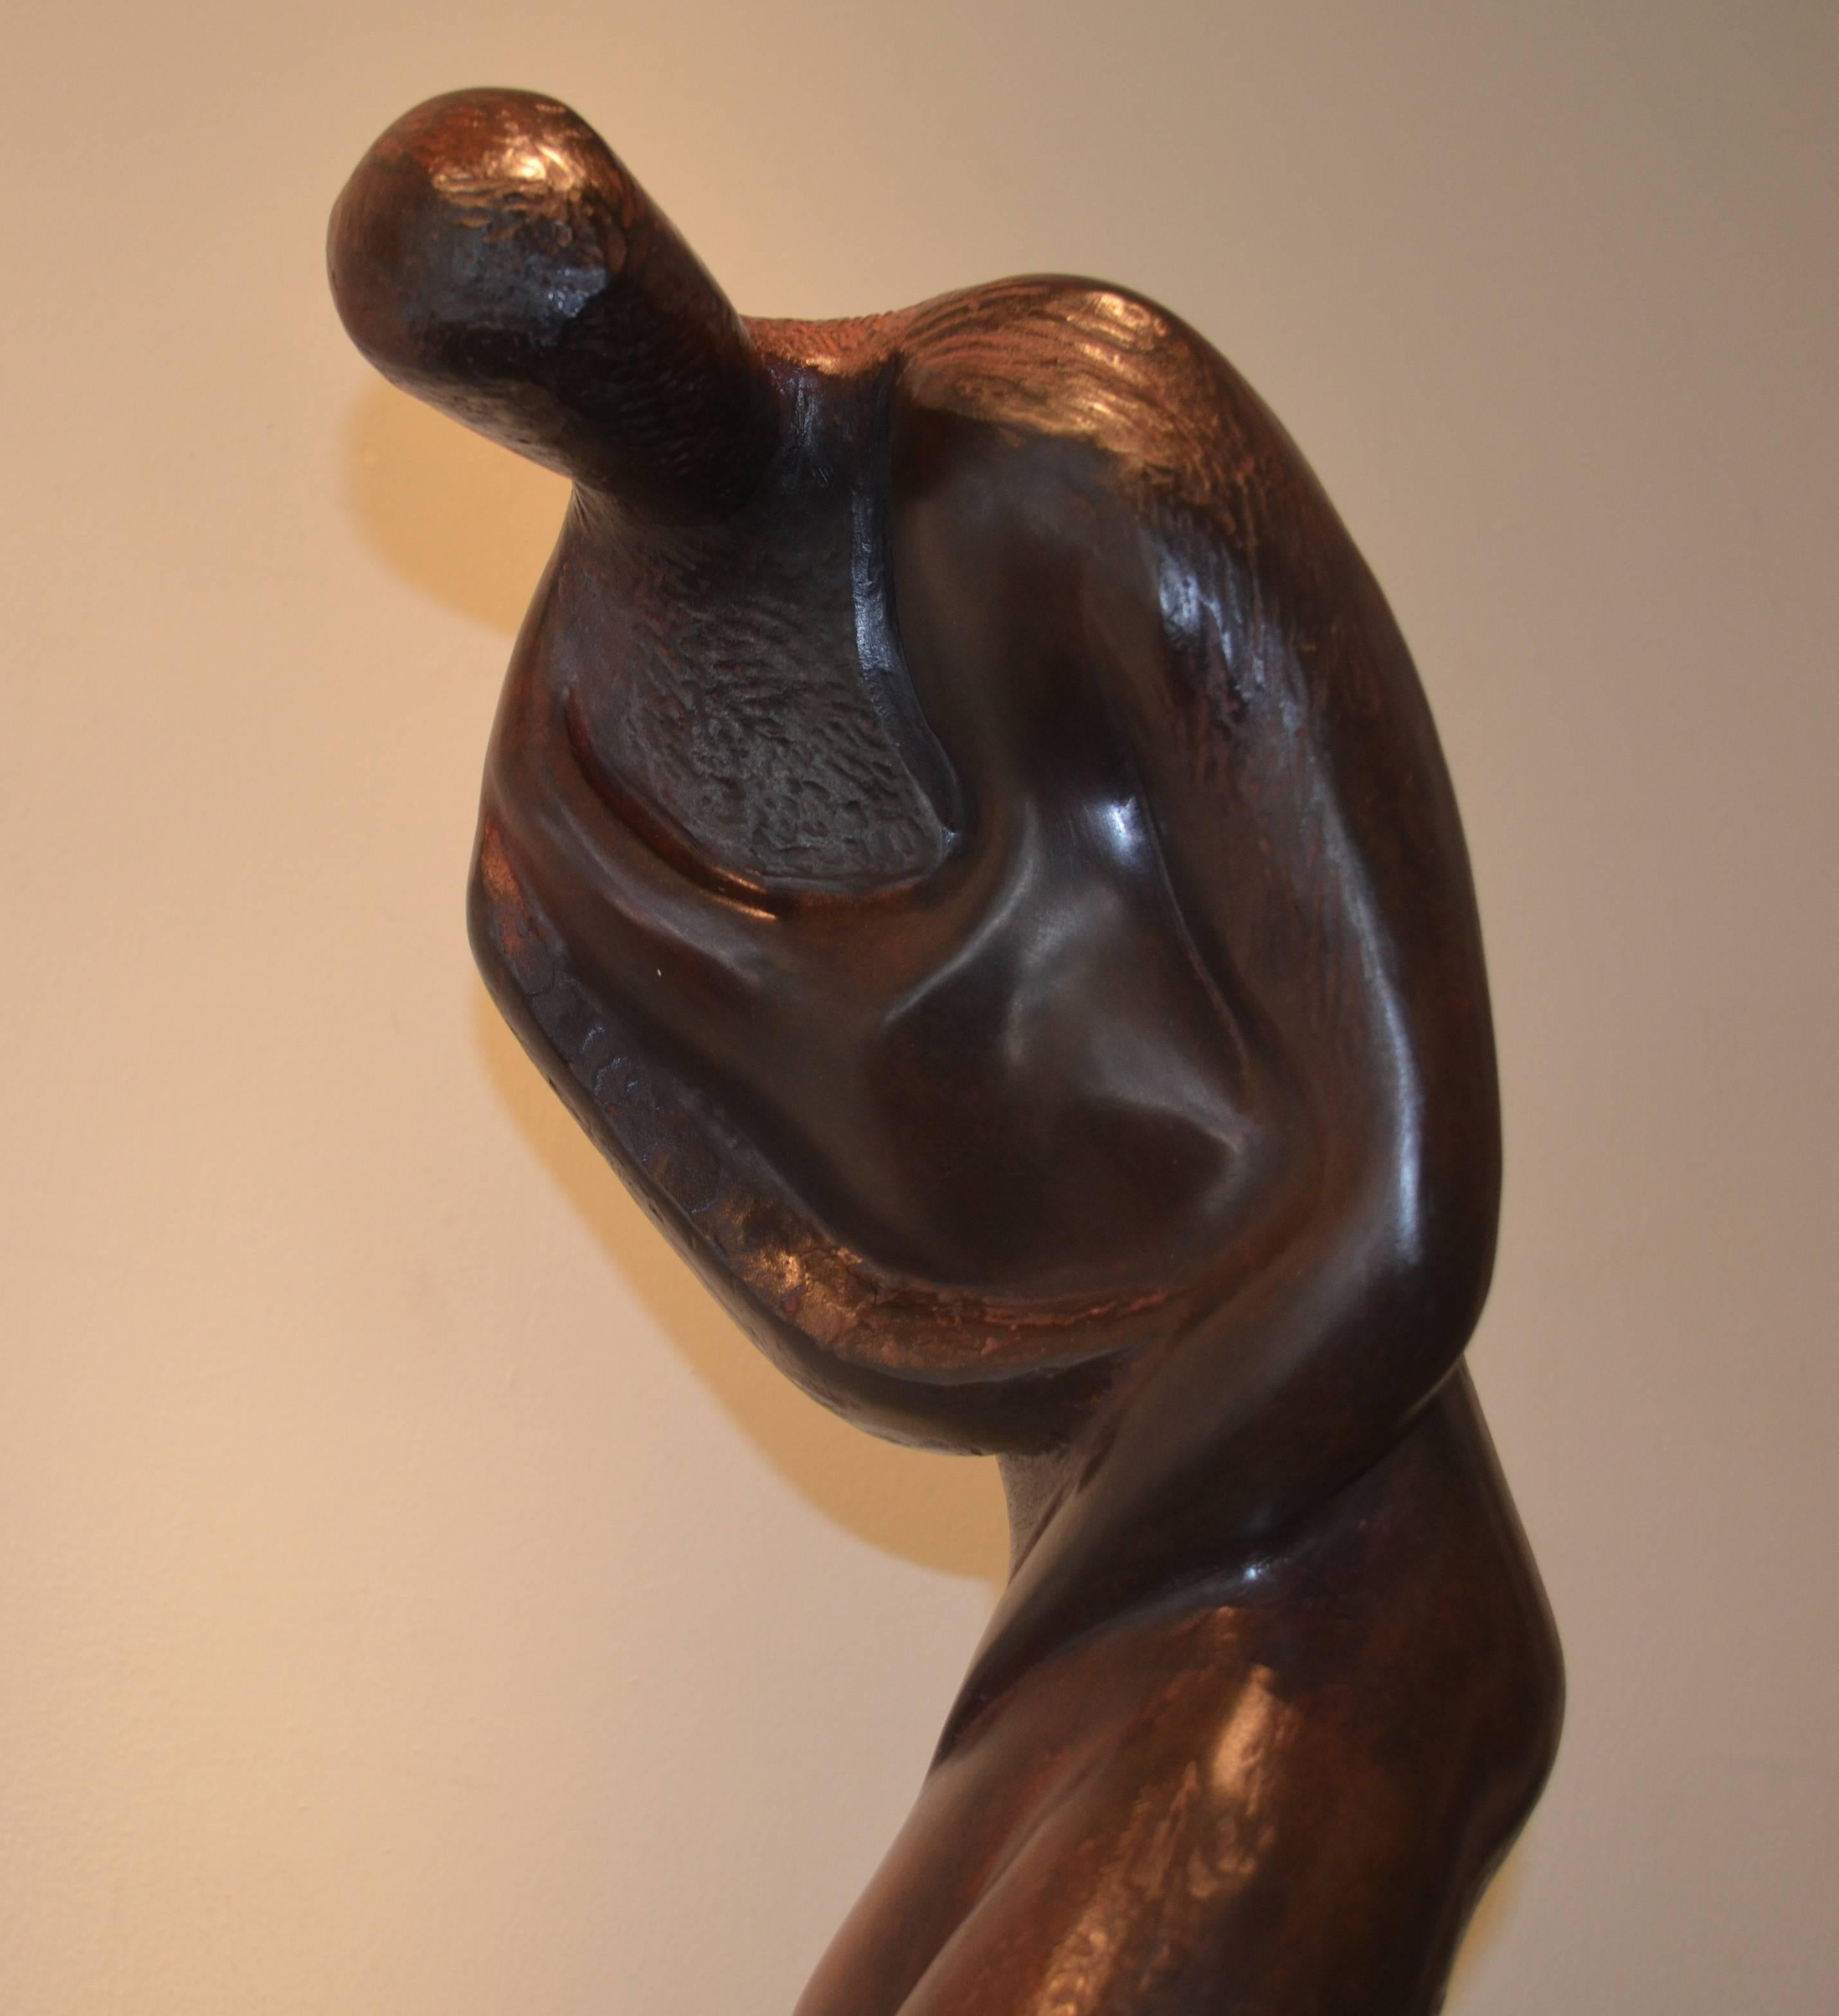 I Held Him And Would Not Let Him Go - Modern Sculpture by Robert Russin